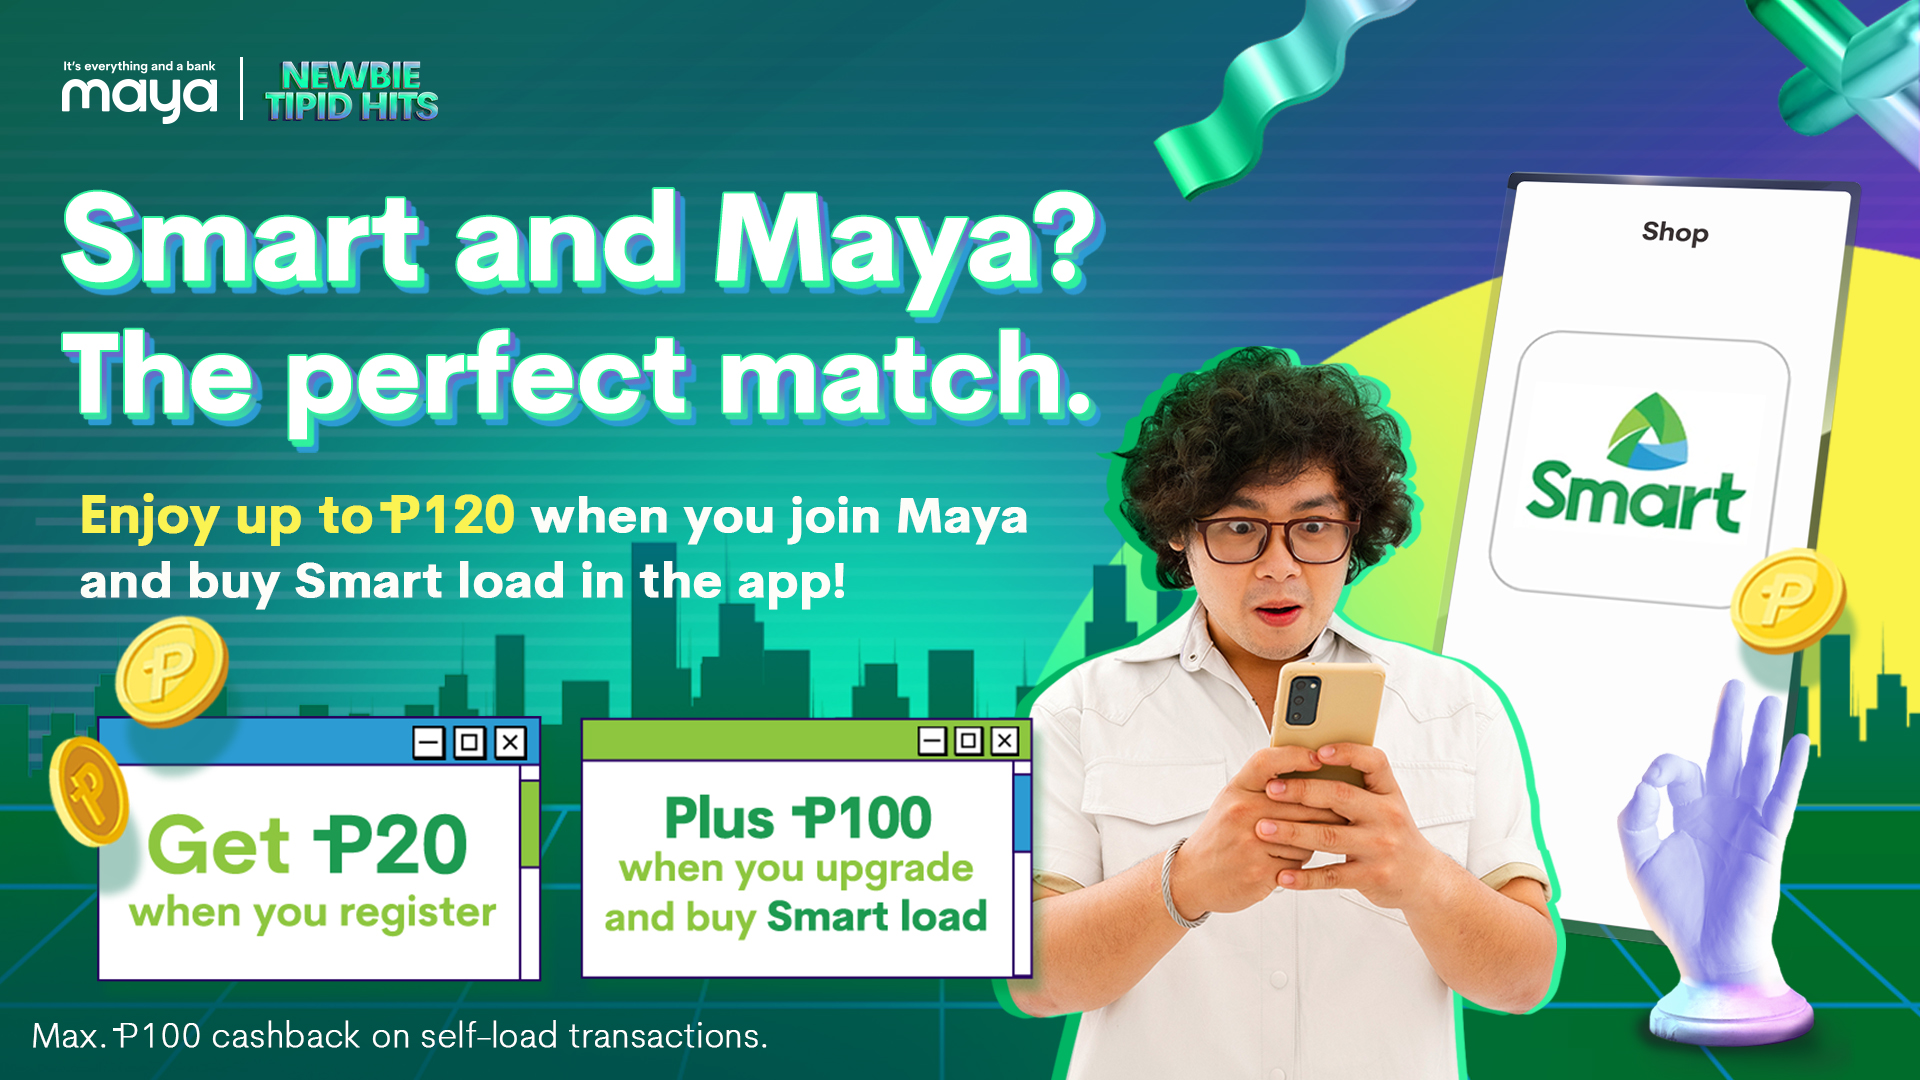 NEW USER EXCLUSIVE: Get 20% cashback when you buy Smart or TNT load!